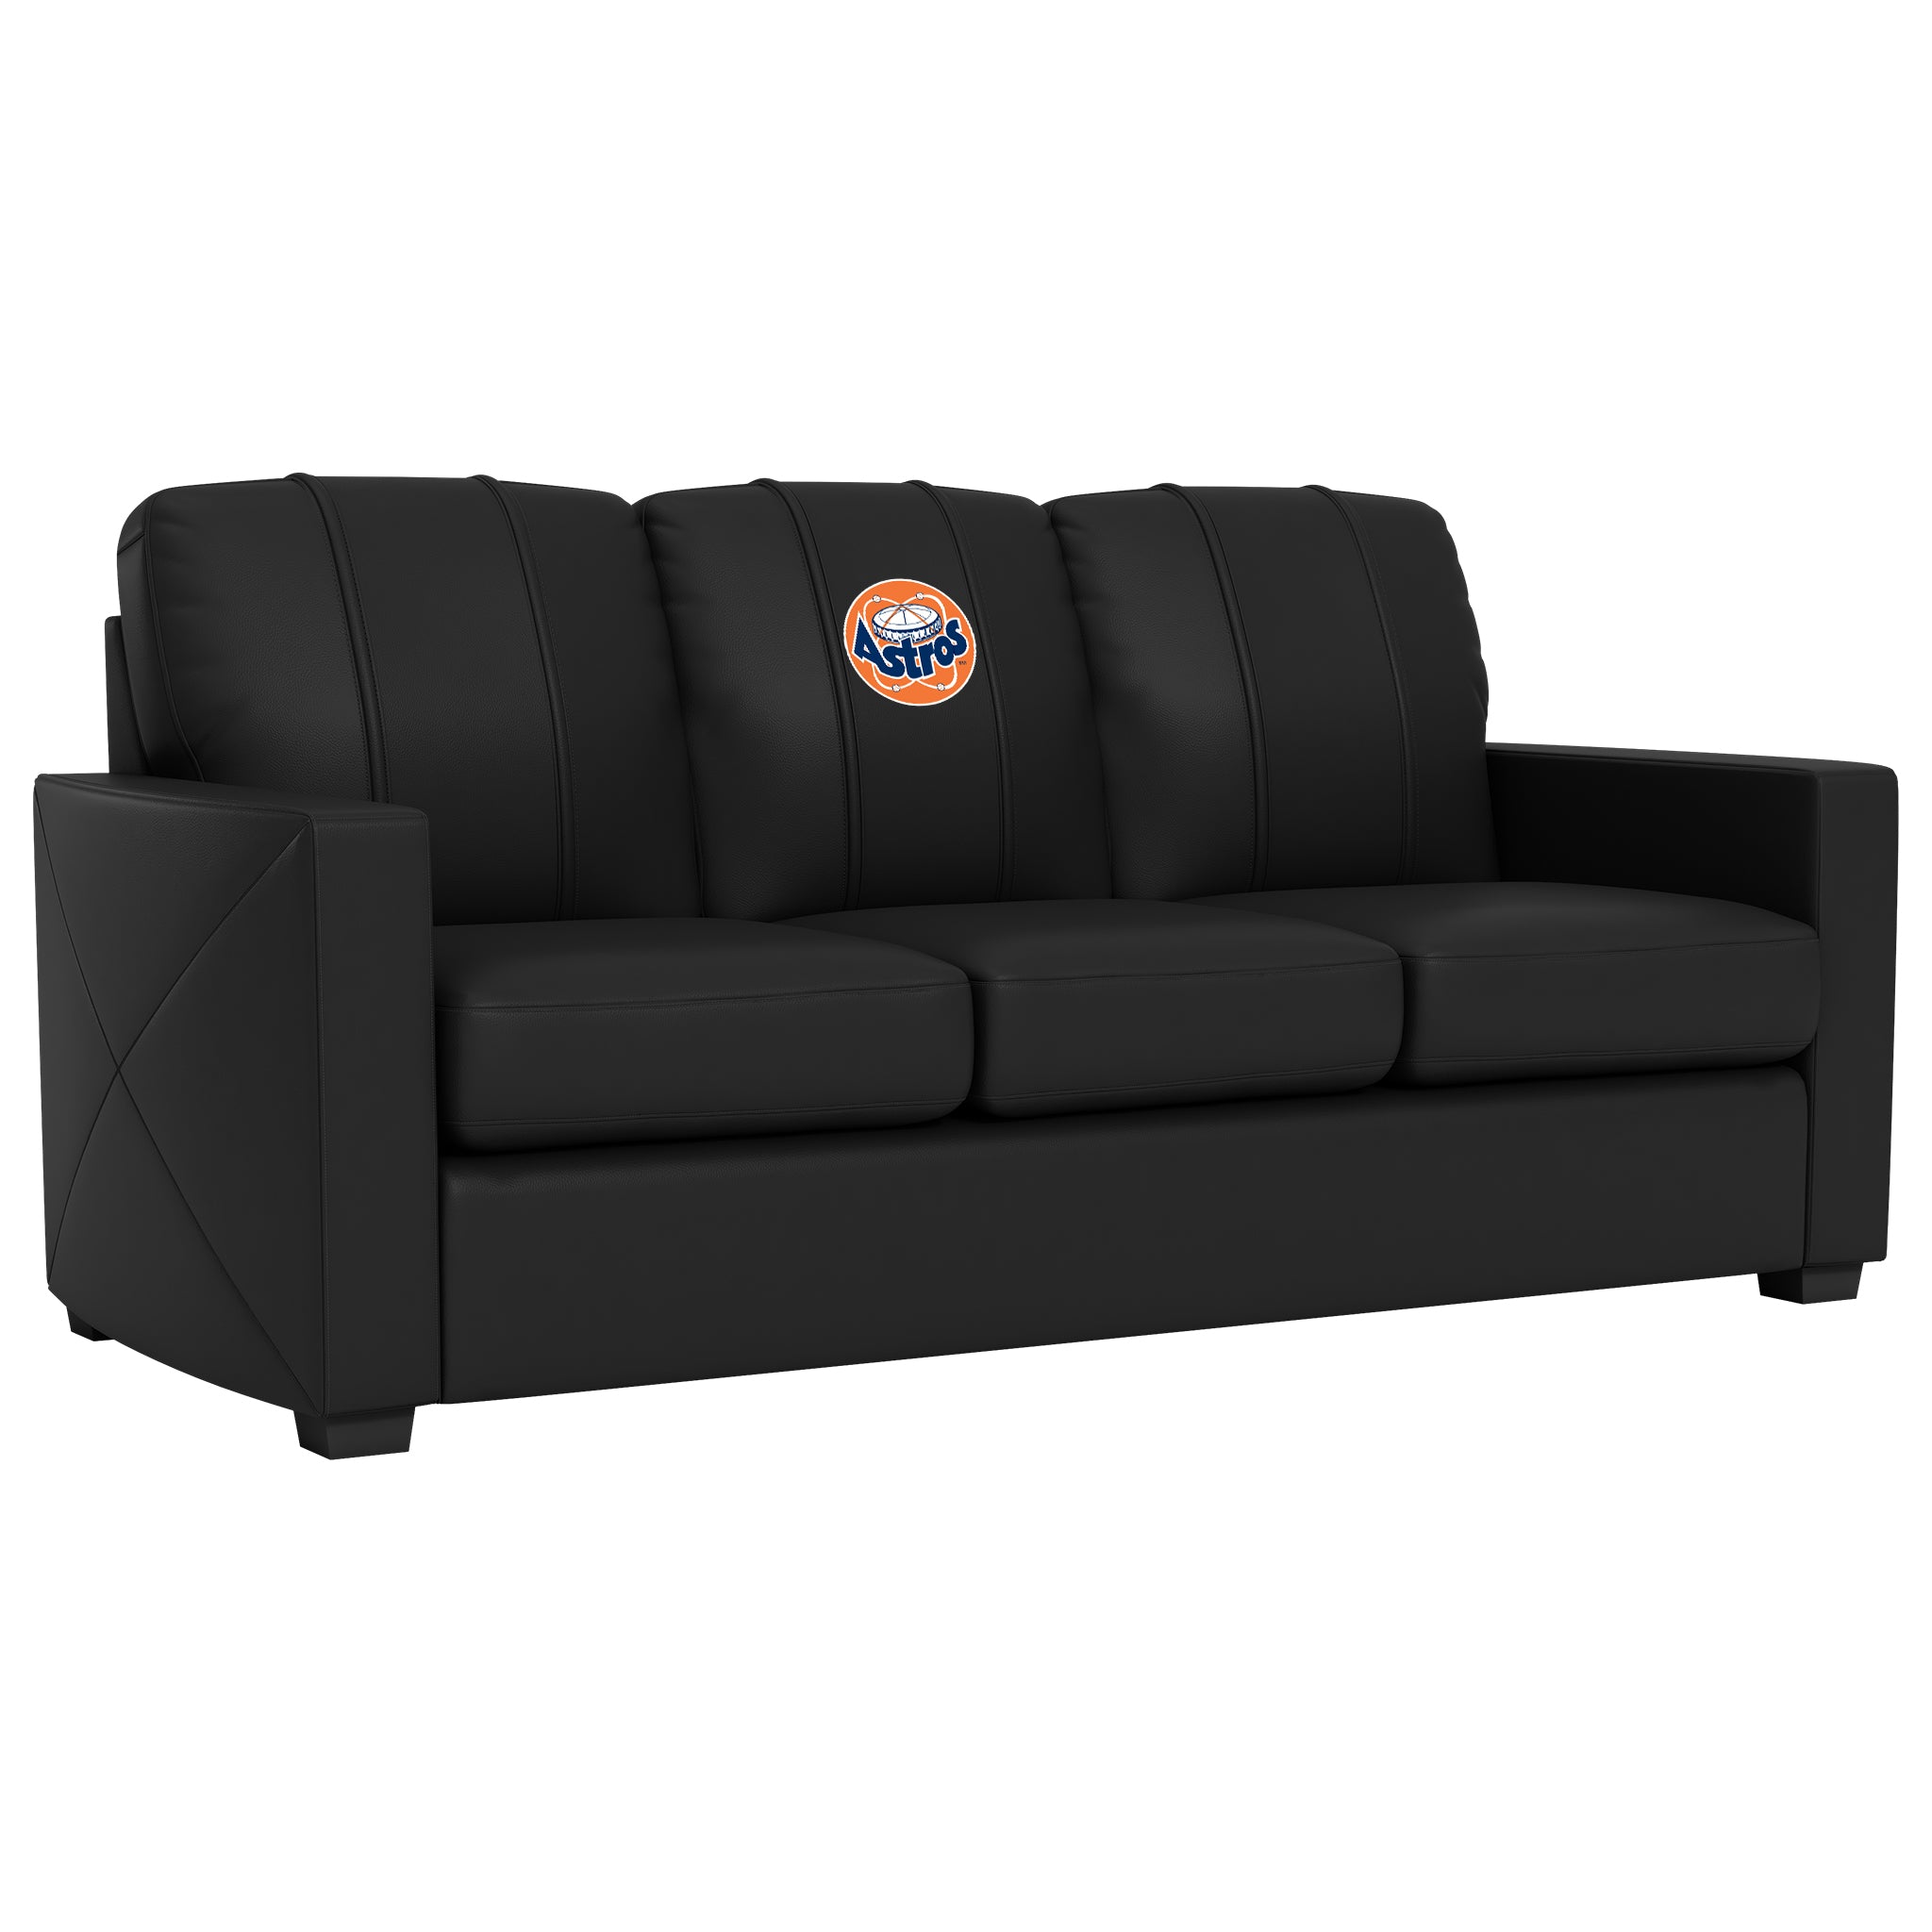 Silver Sofa with Houston Astros Cooperstown